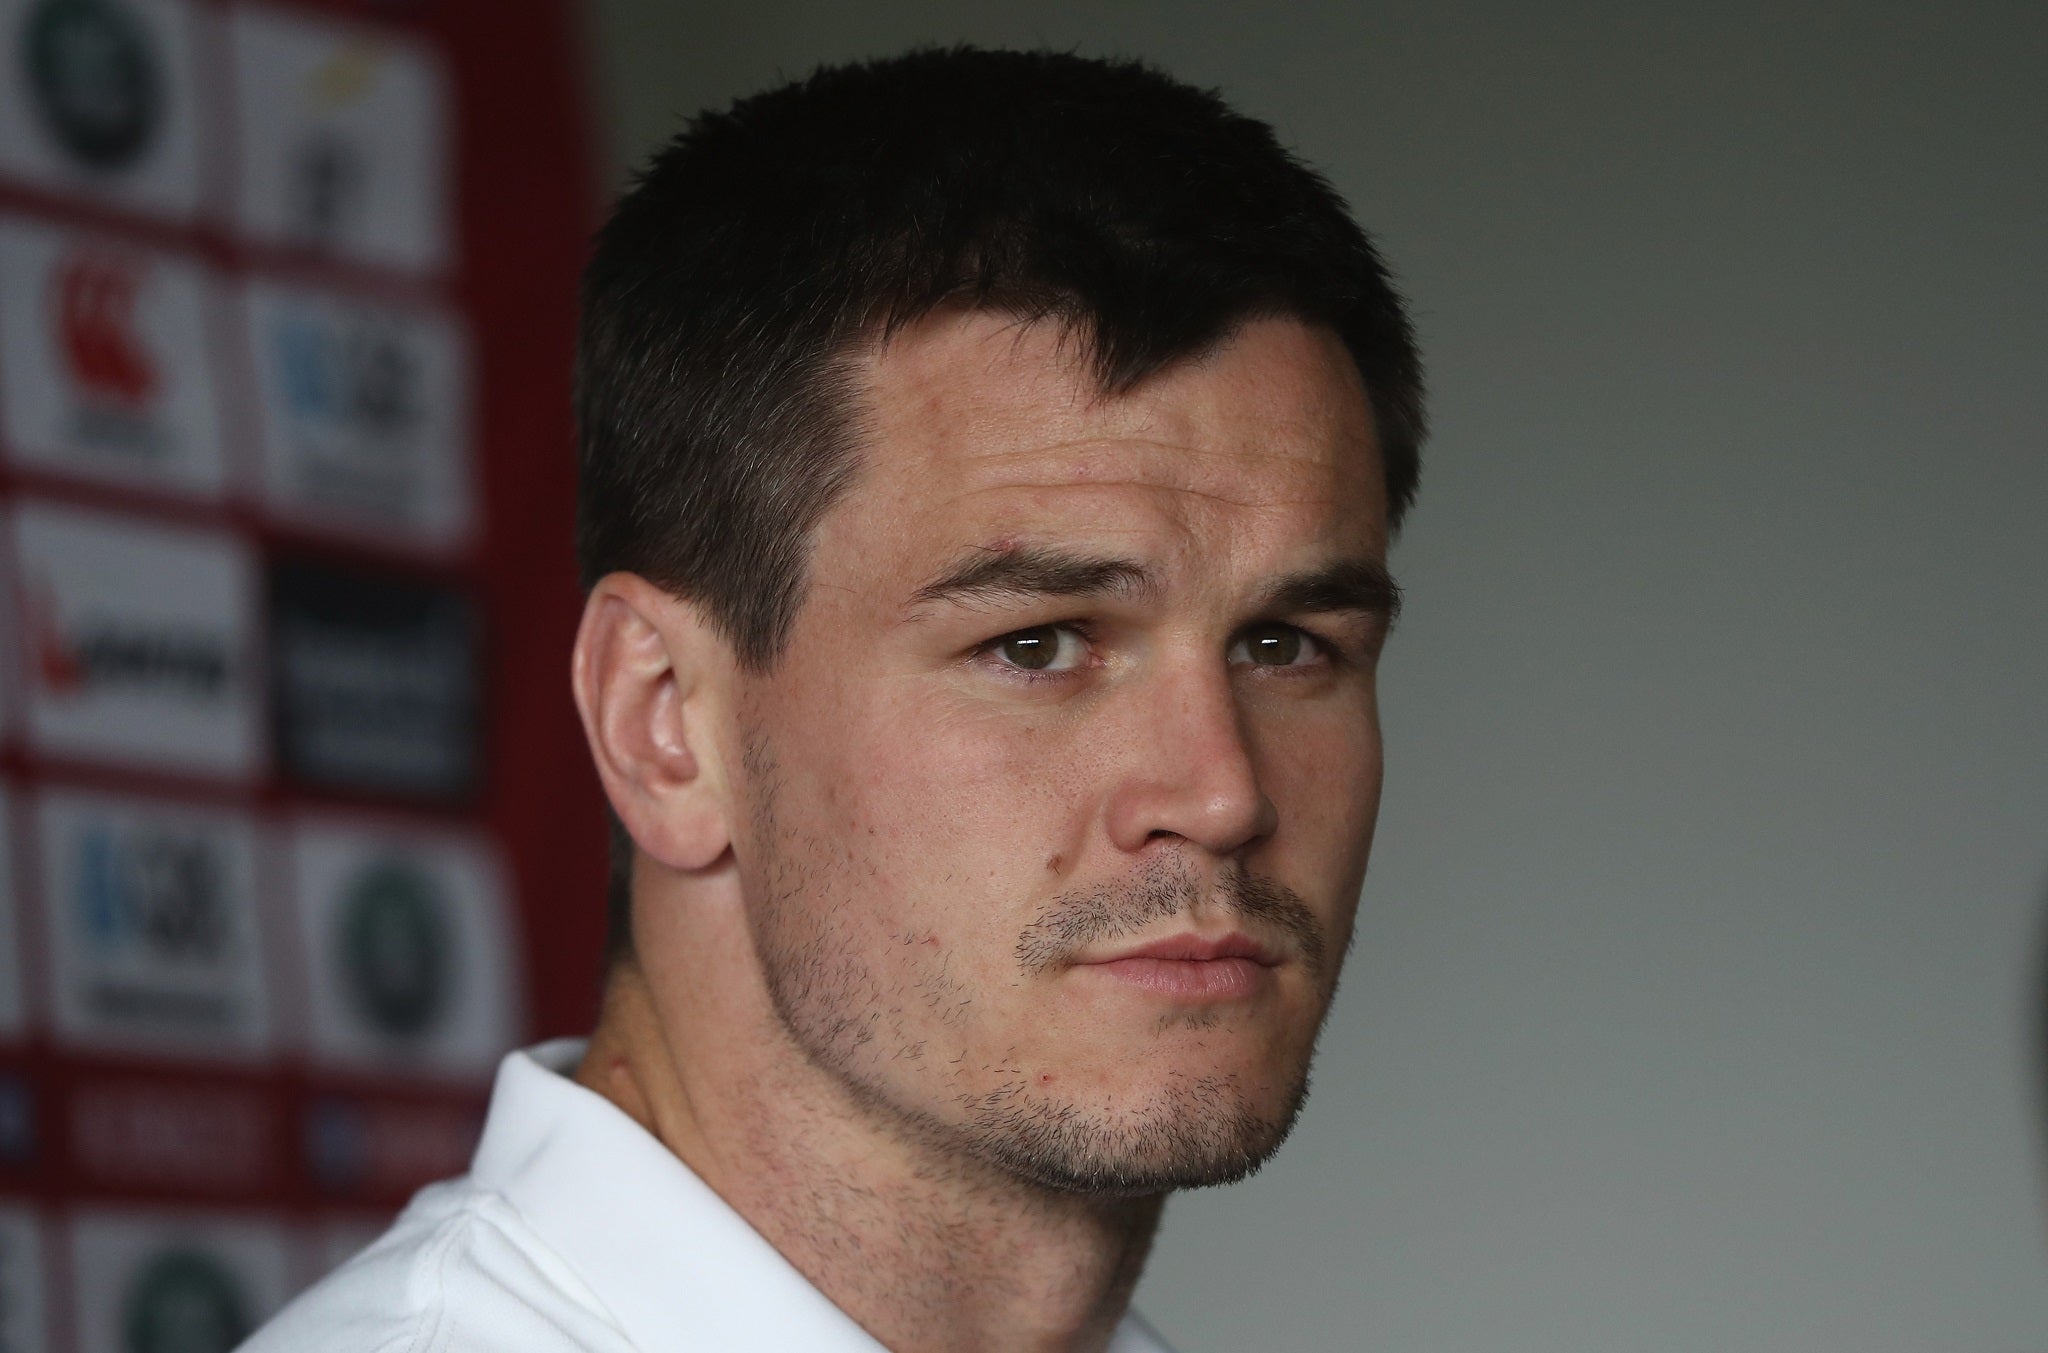 Jonathan Sexton believes Owen Farrell poses his biggest individual challenge of his career